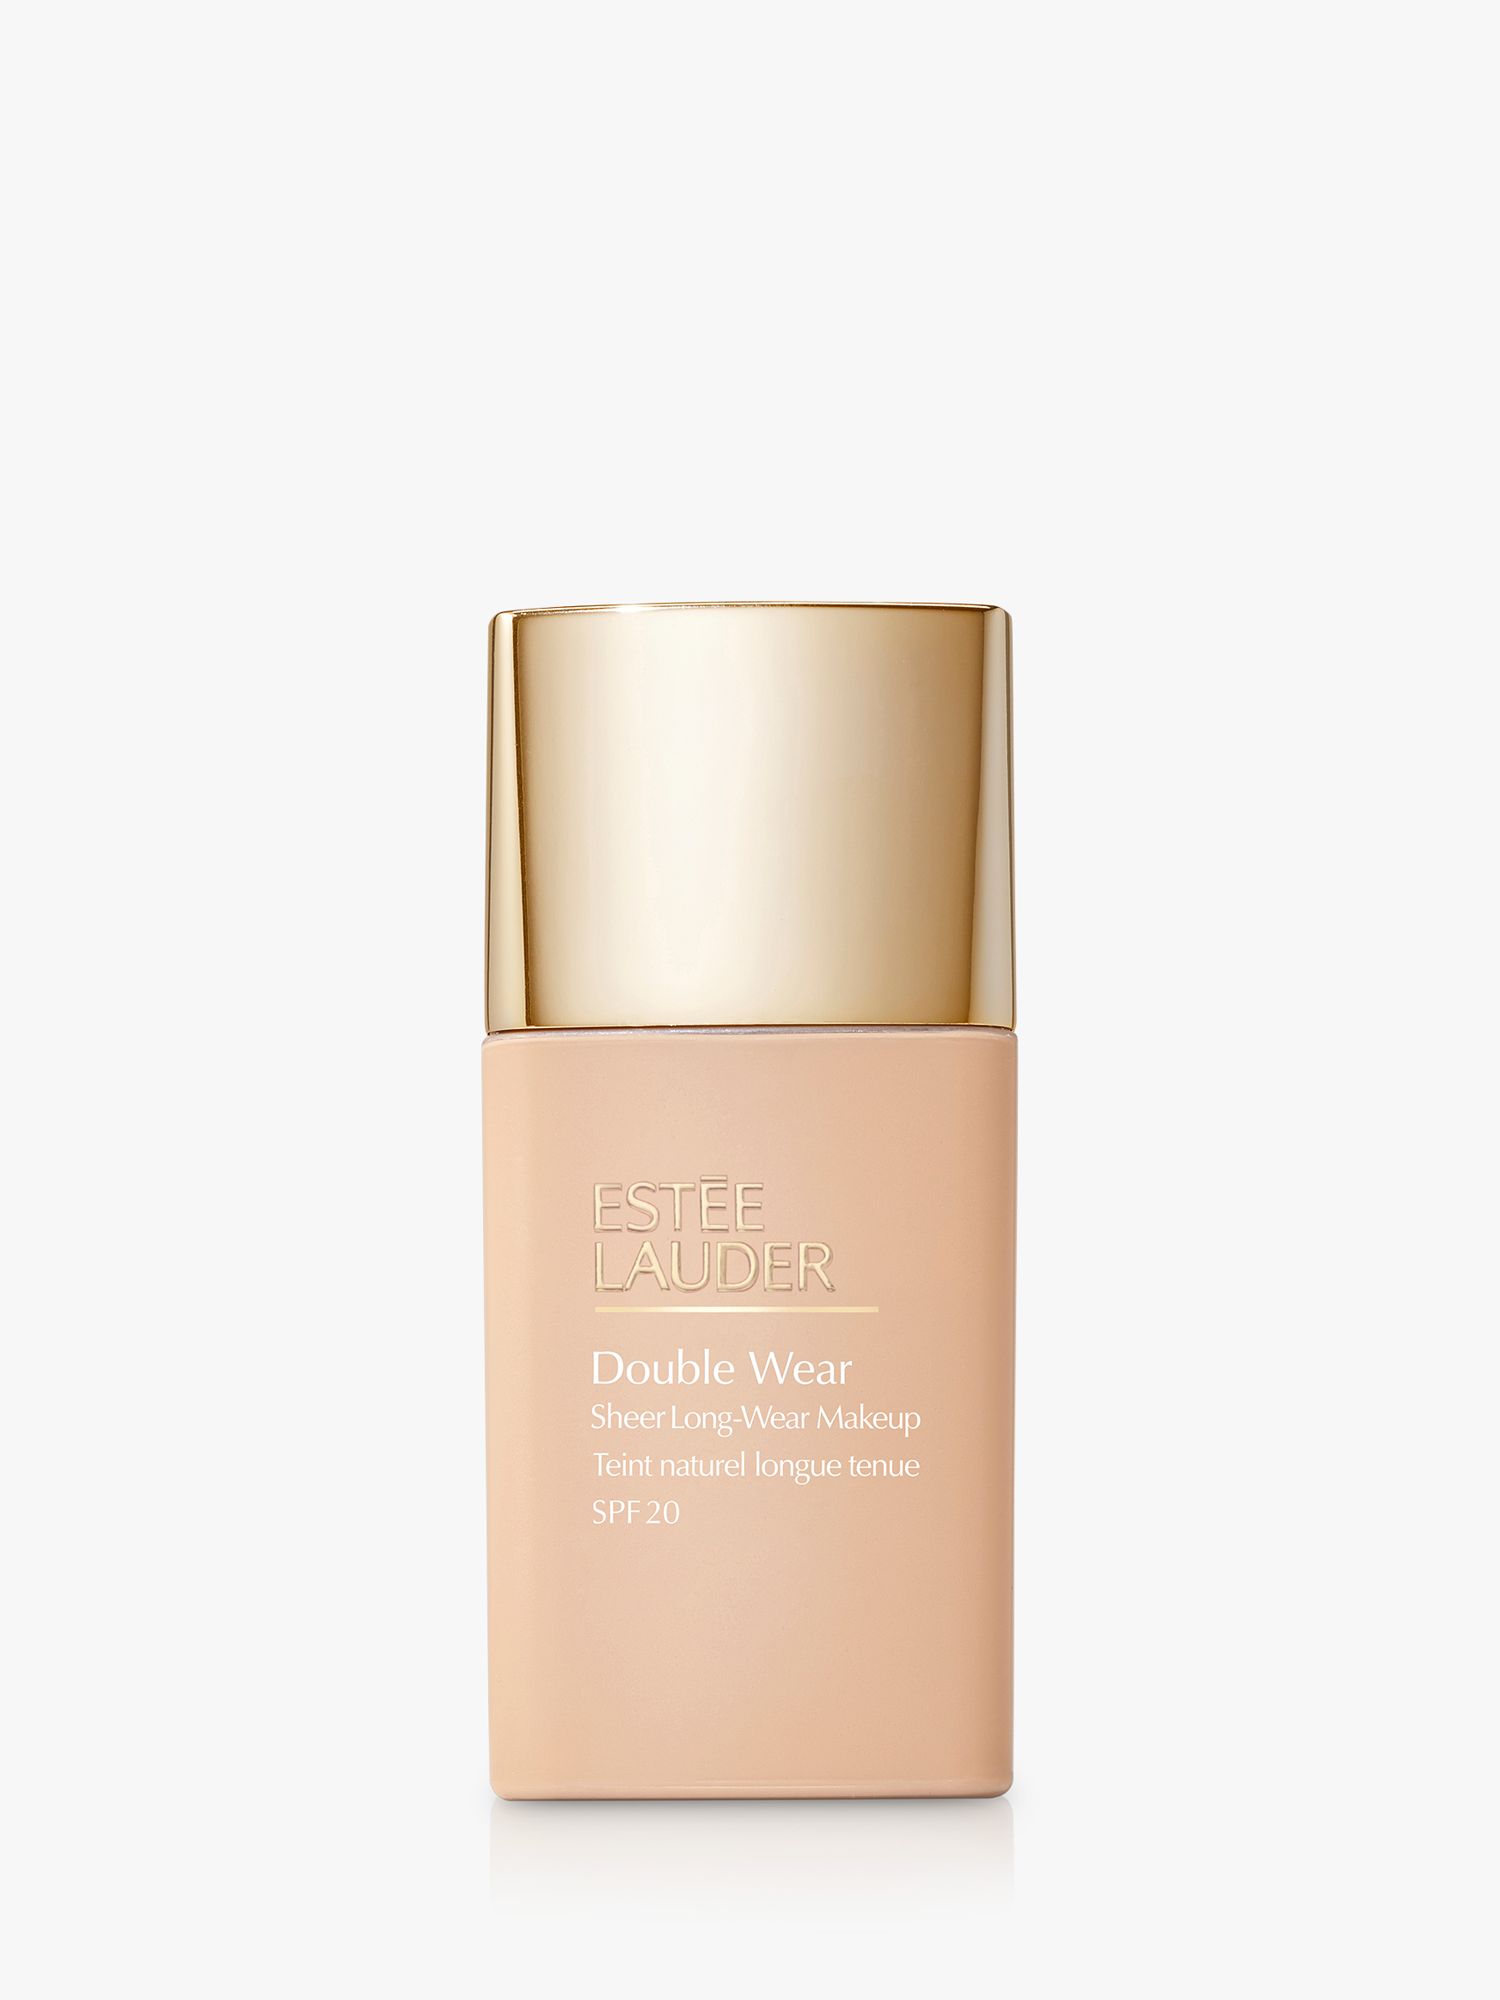 21 Best Estée Lauder Products That Are Totally Worth It